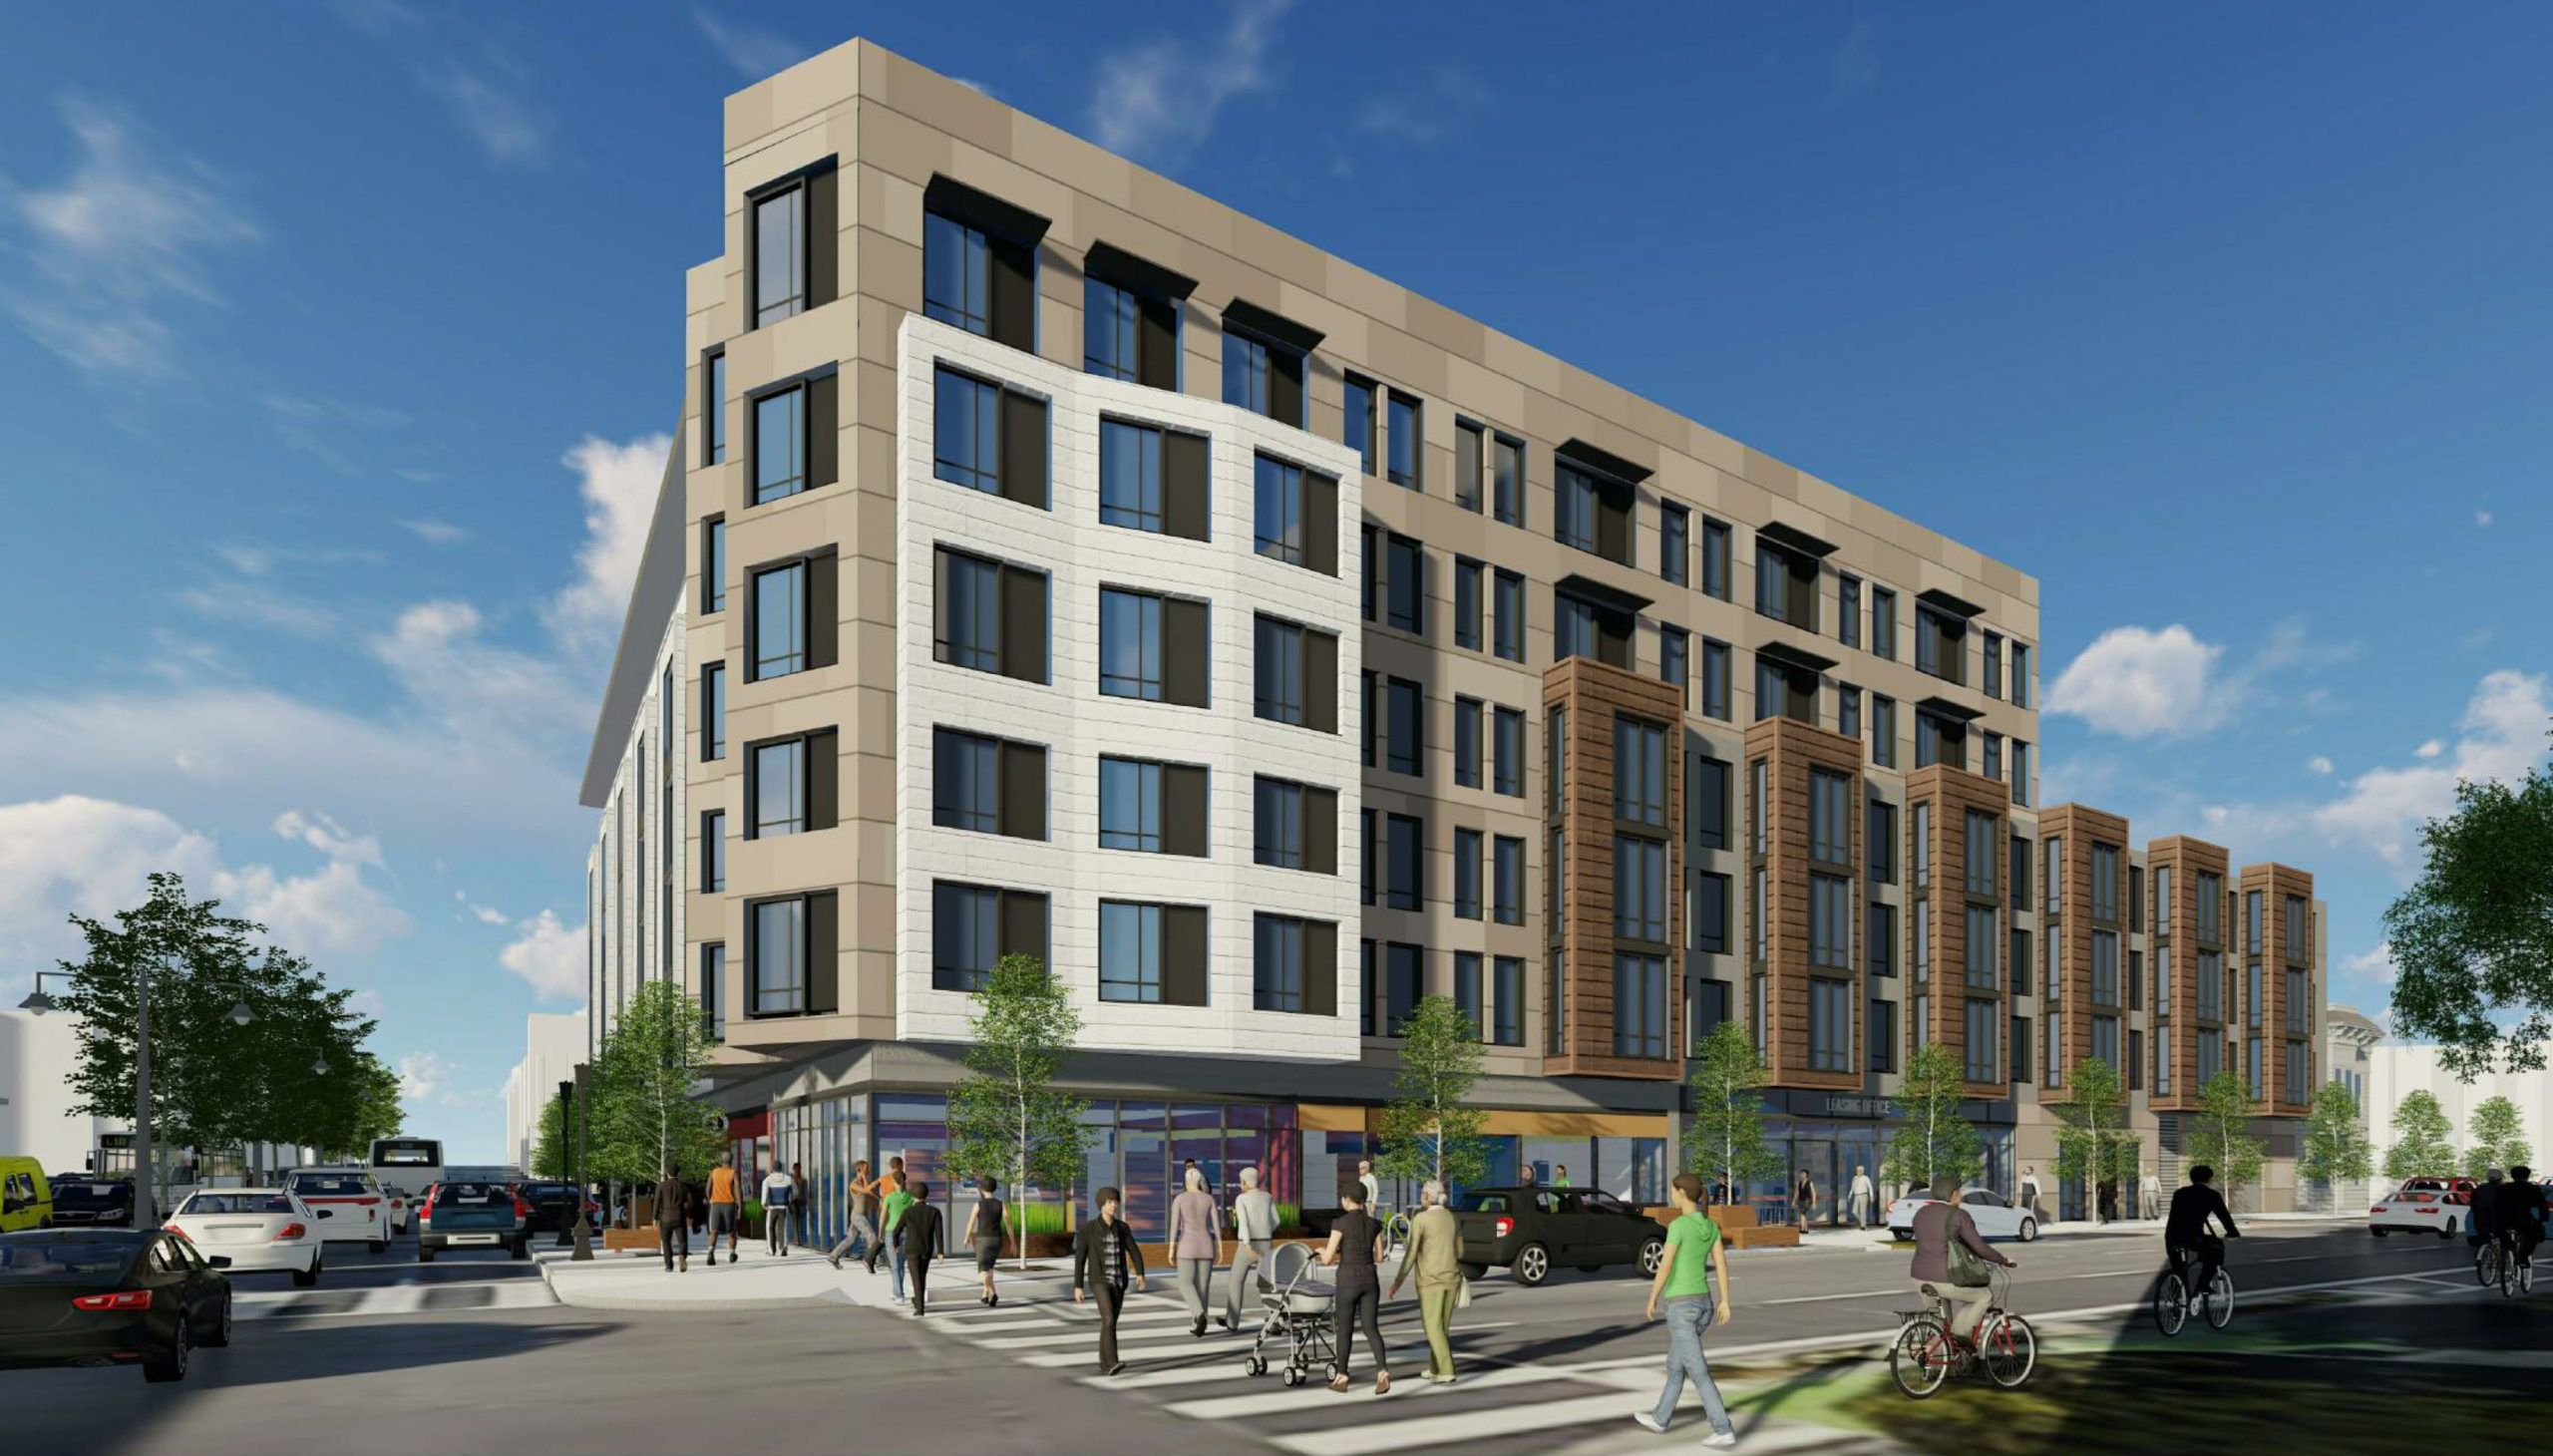 400 Divisadero Street street view, rendering by BDE Architecture